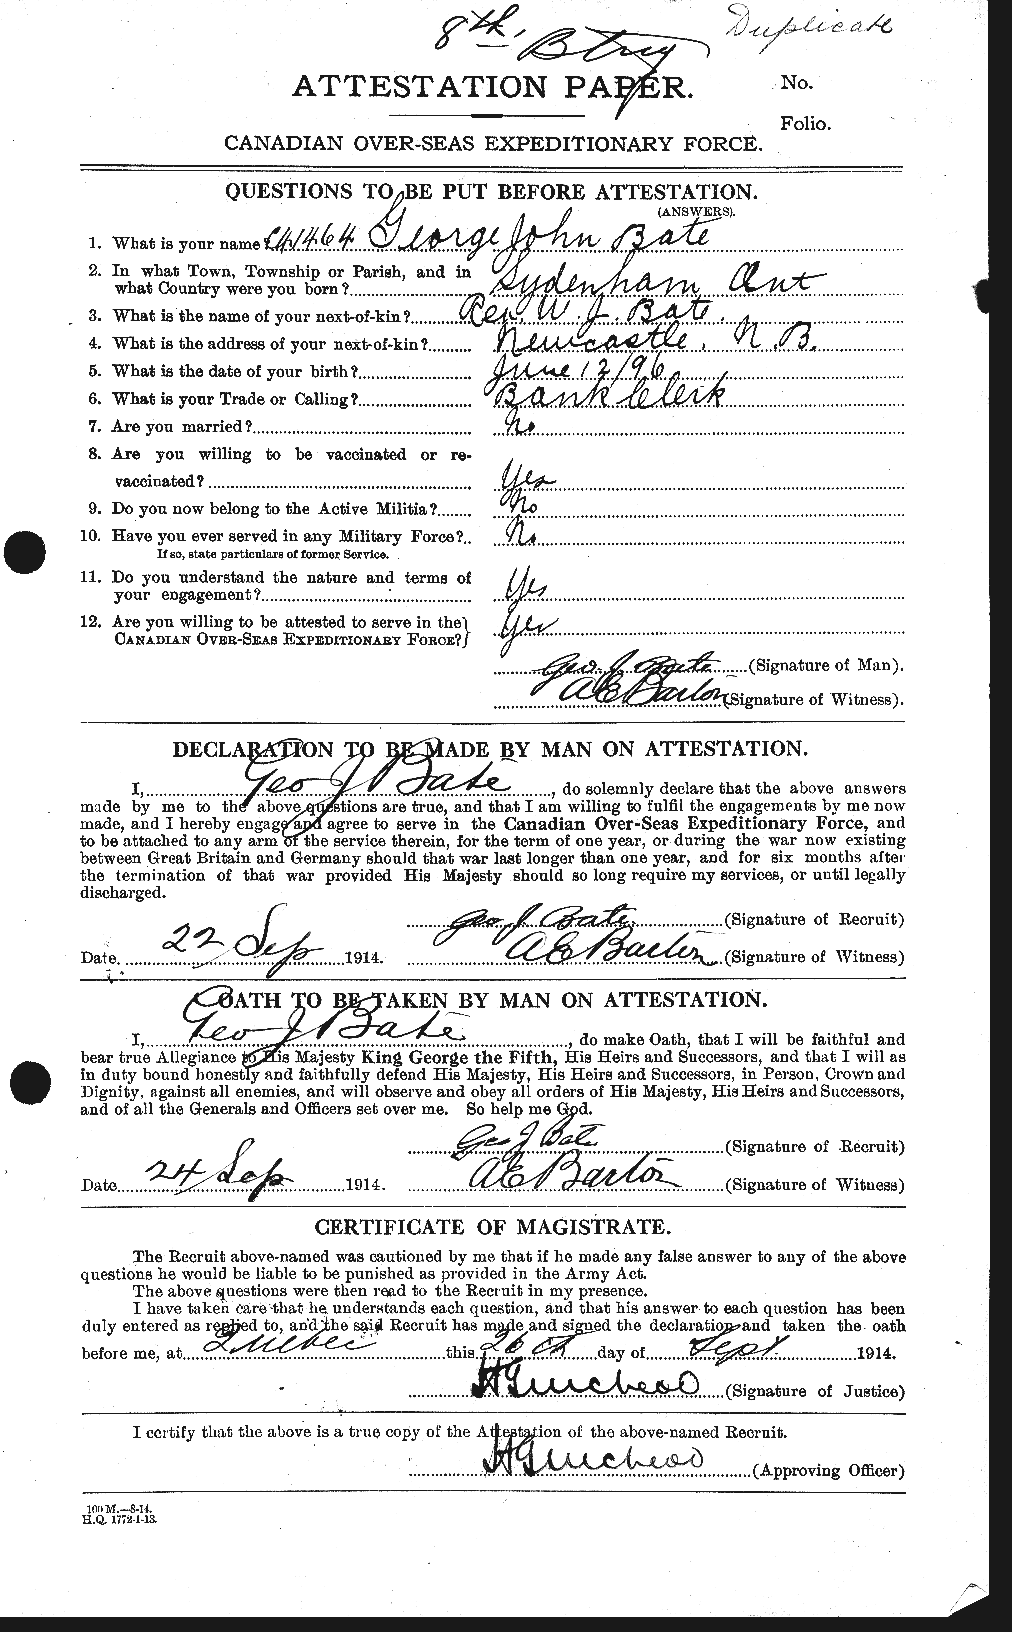 Personnel Records of the First World War - CEF 228102a